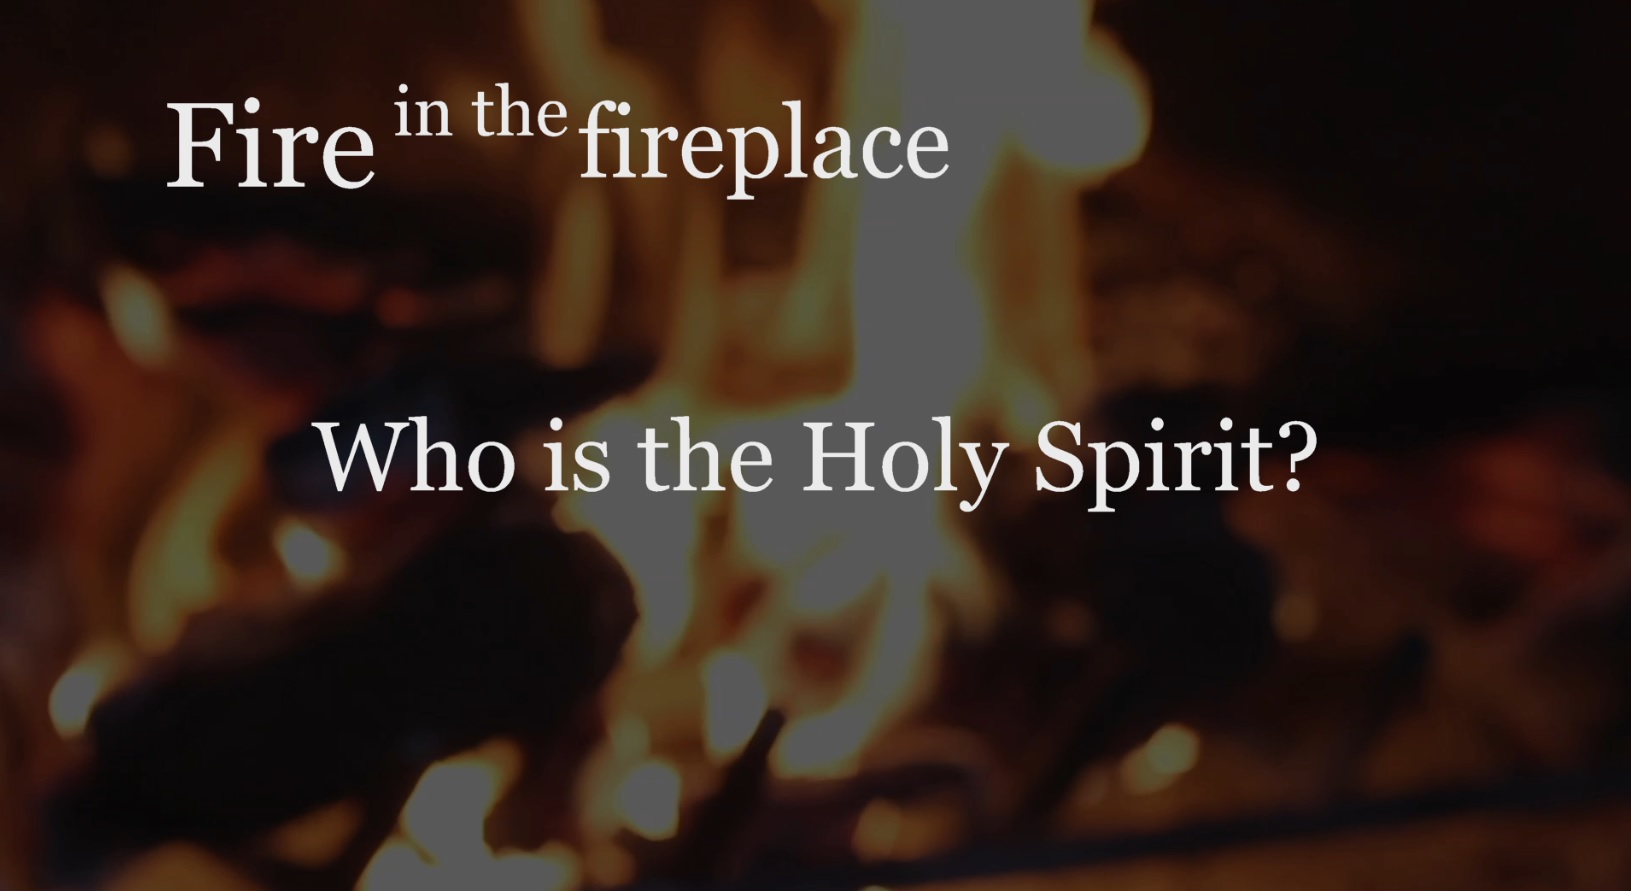 Fire in the fireplace: Who is the Holy Spirit?